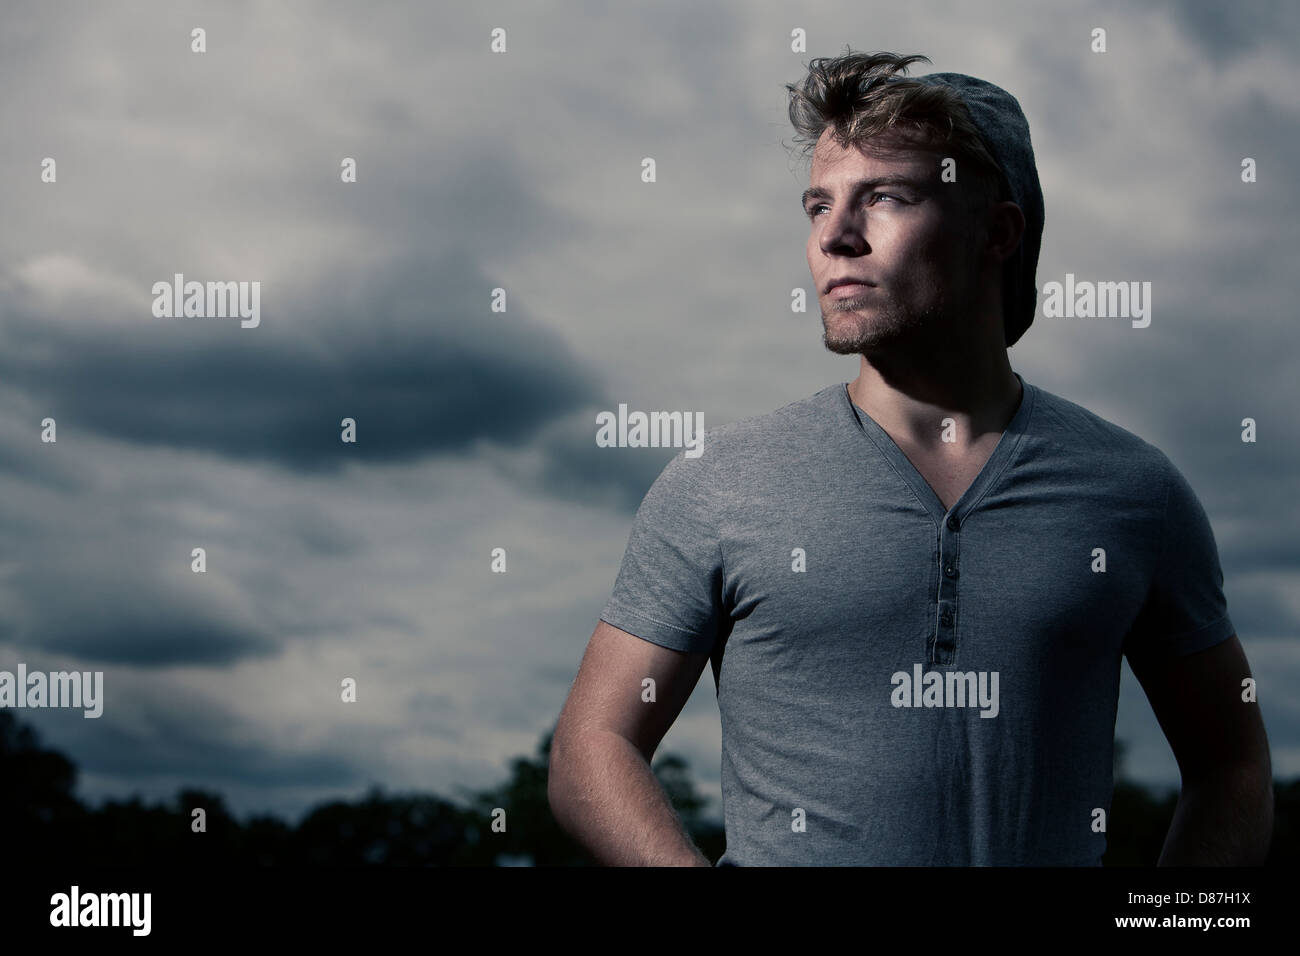 Man staring off into the light against cloudy sky Stock Photo